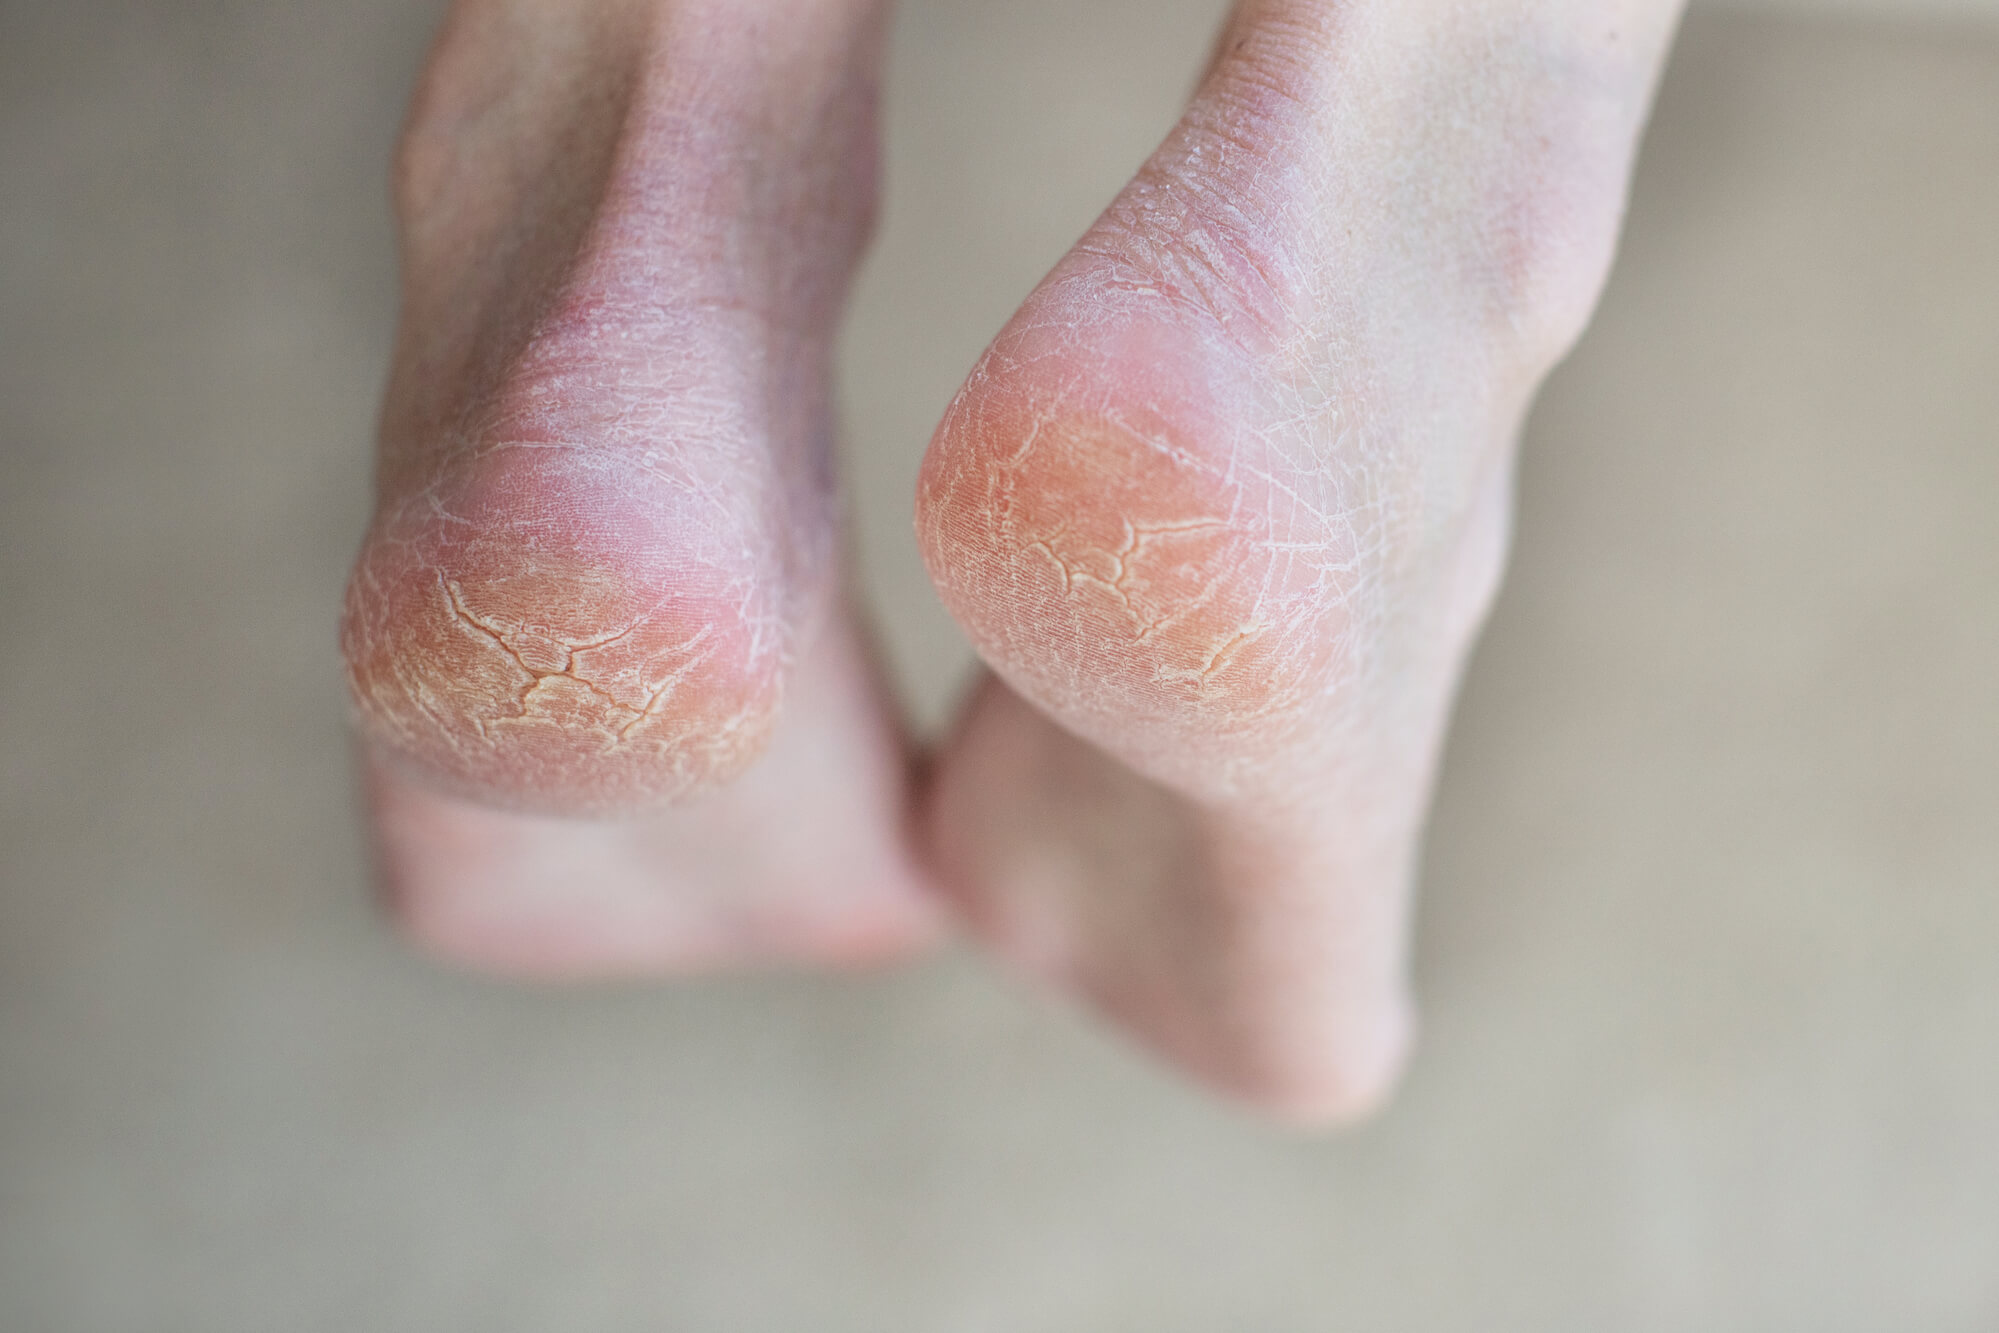 Dry, Cracked Feet: Treatment, Causes, and Home Remedies